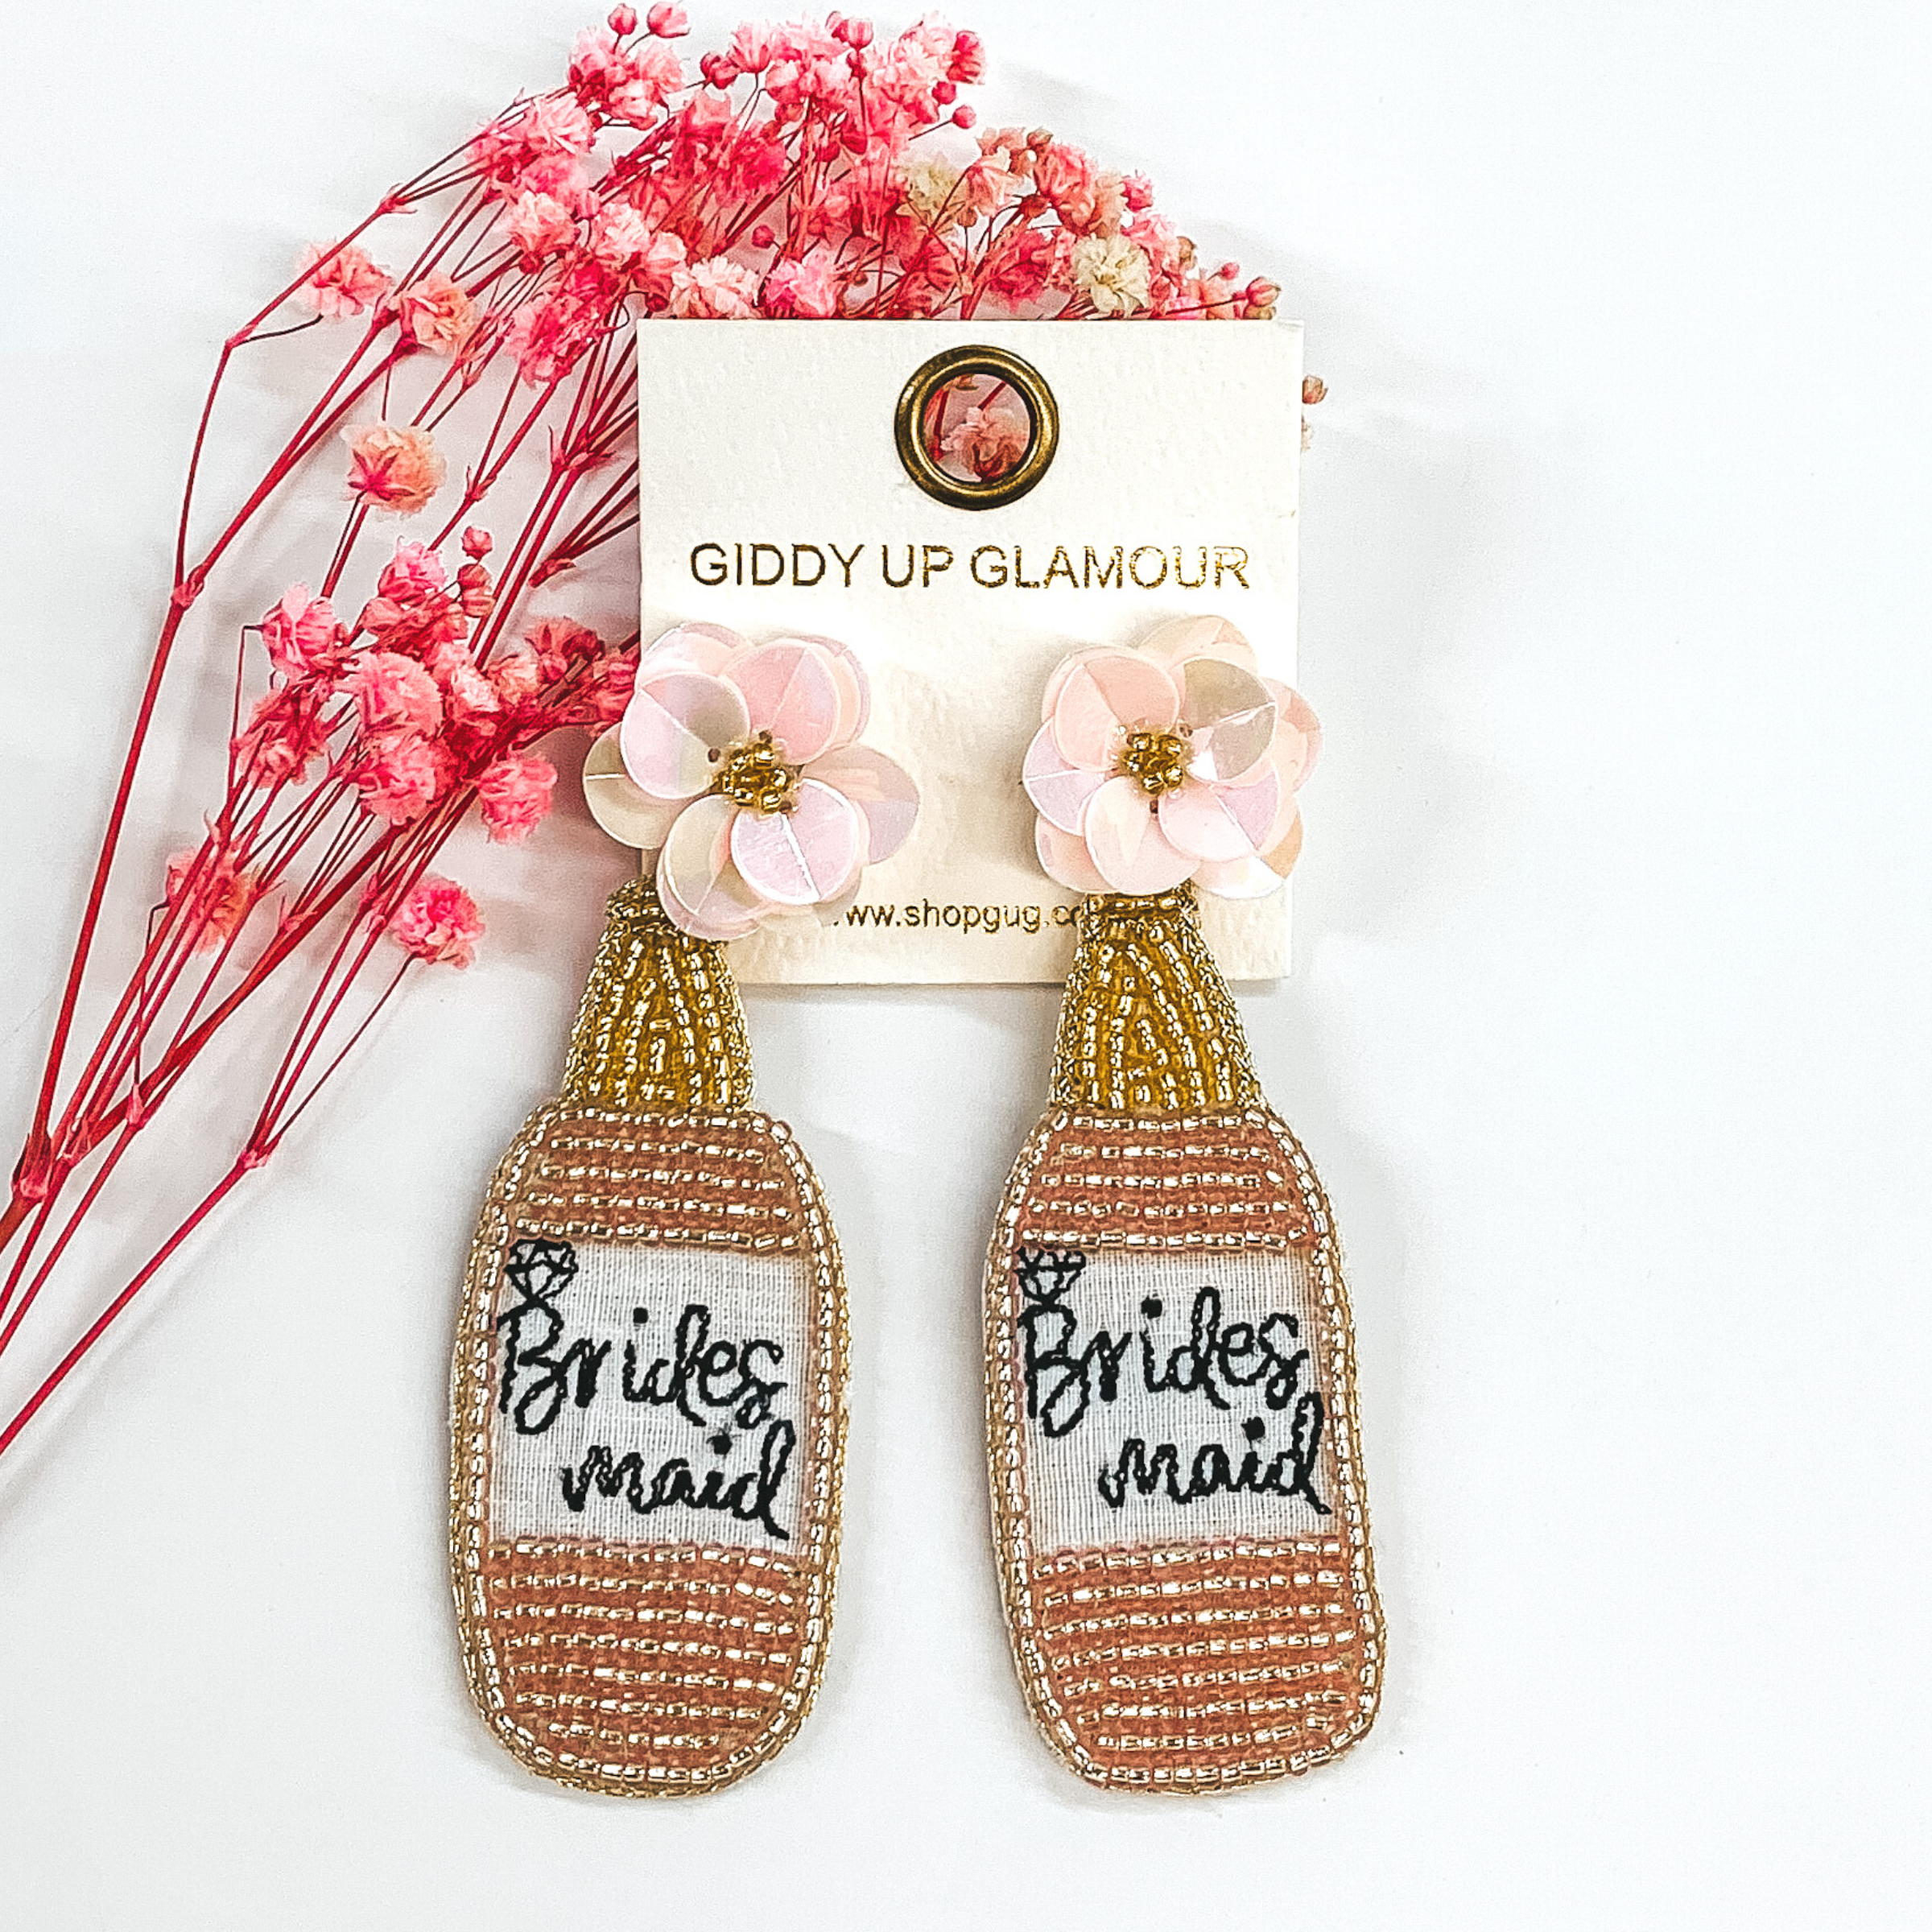 pink and gold beaded champagne bottles with bridesmaid written in the center and light pink flower studs